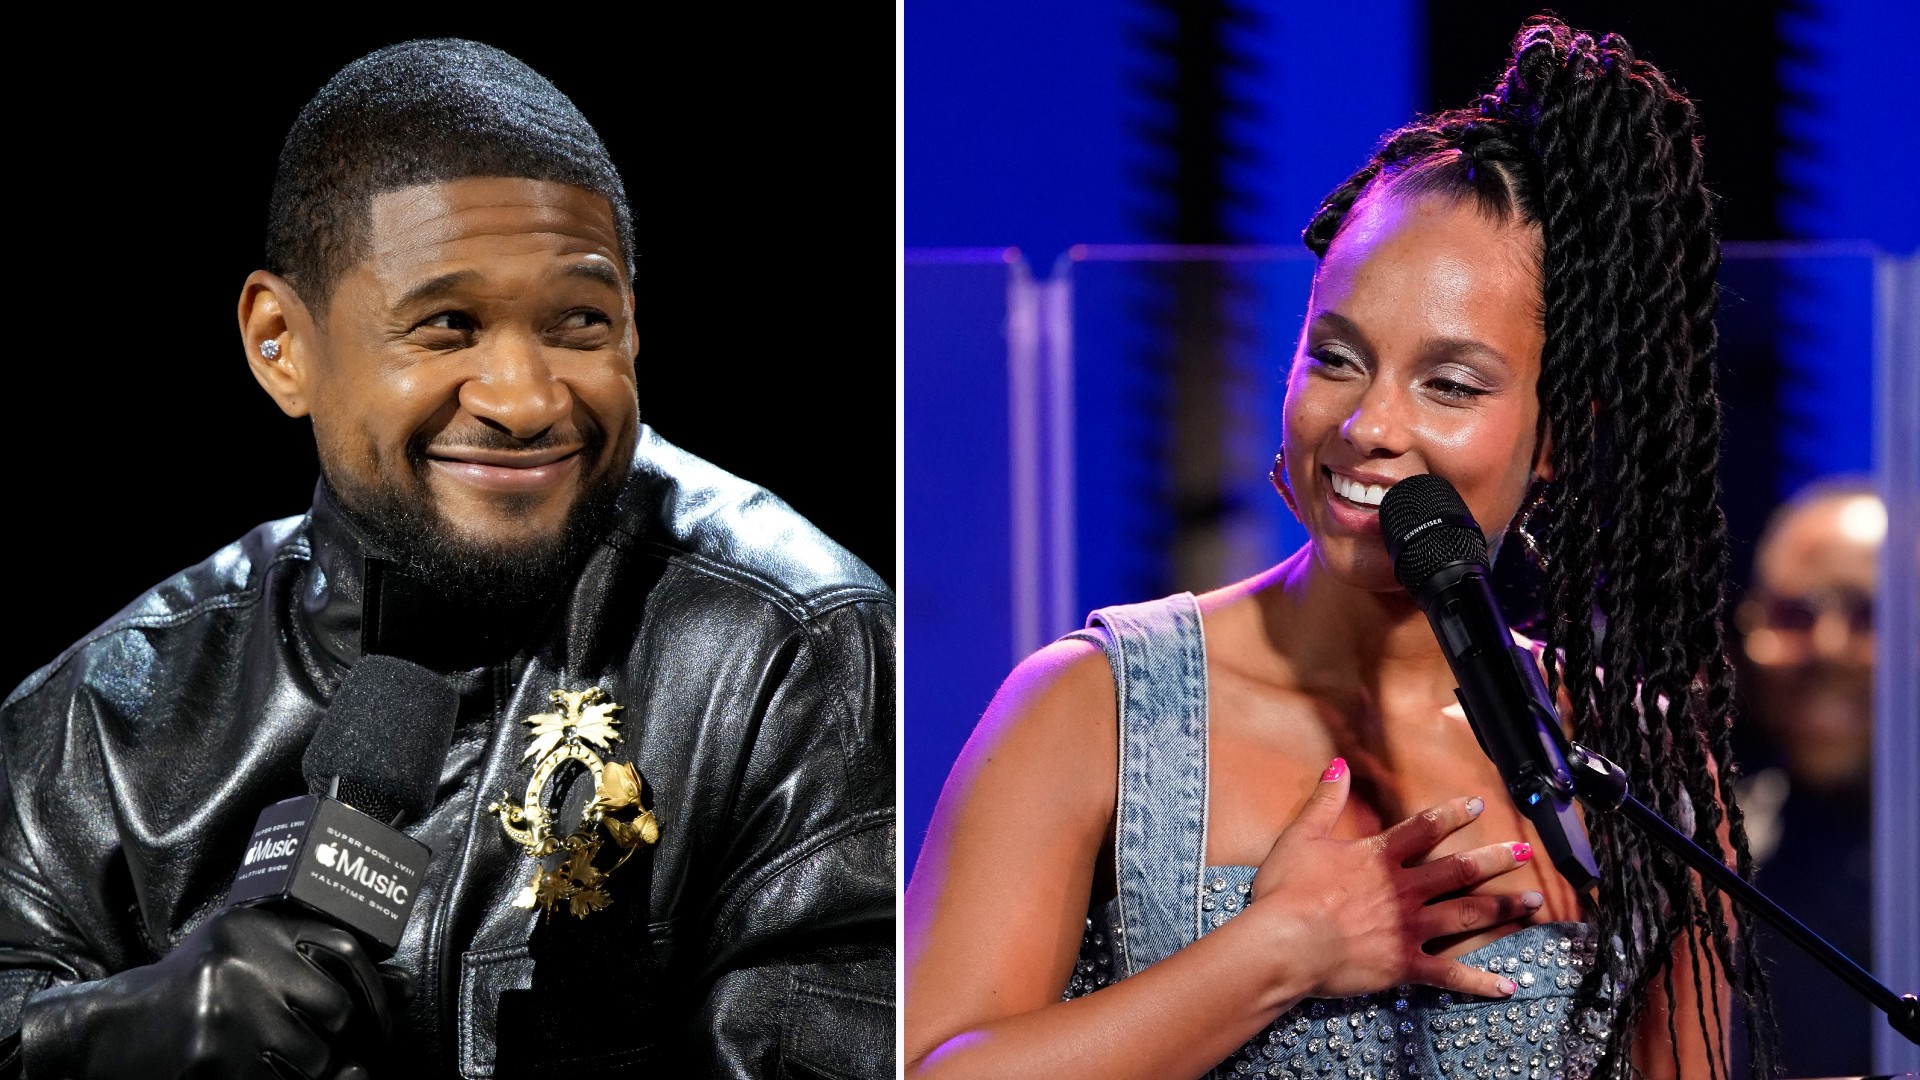 Usher May Be Joined By Alicia Keys At Super Bowl Halftime Show